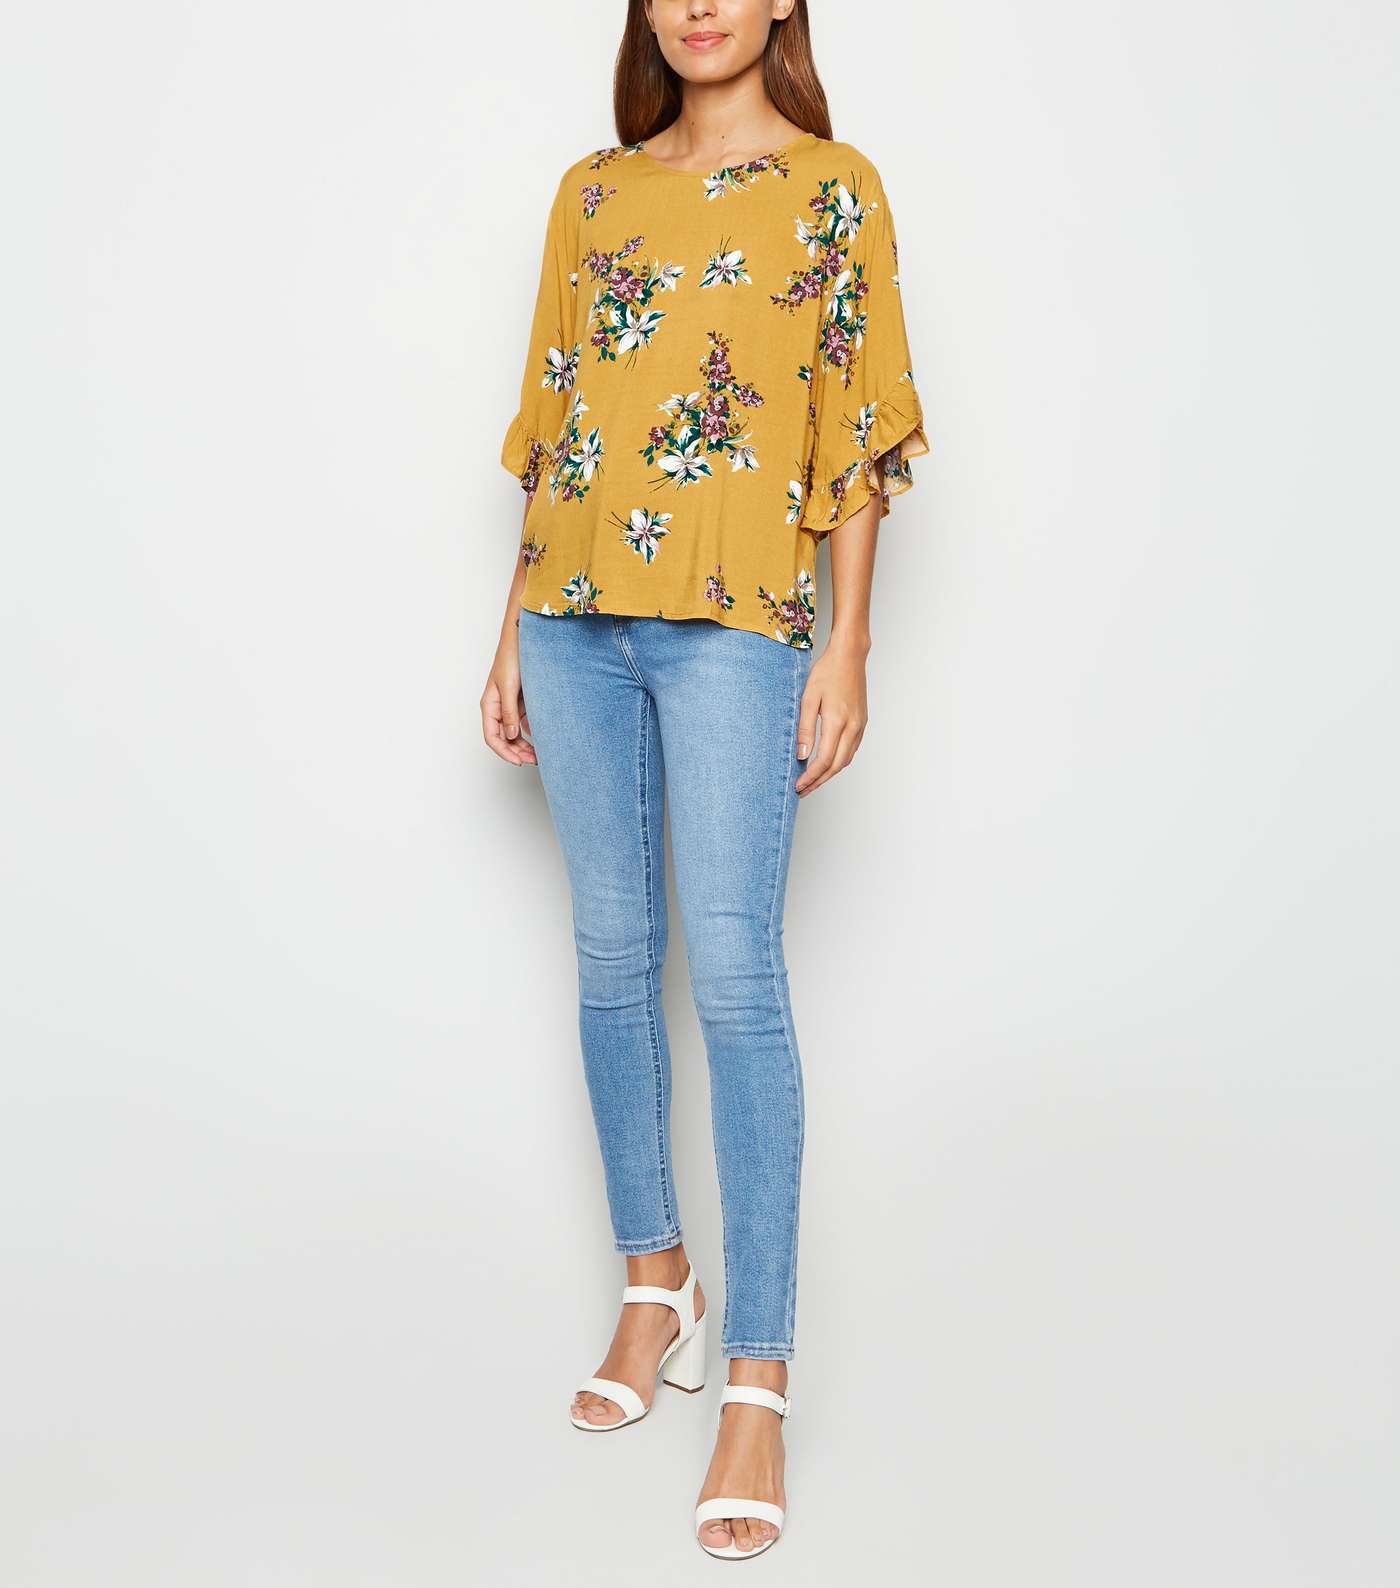 Apricot Mustard Floral Ruffle Sleeve Top